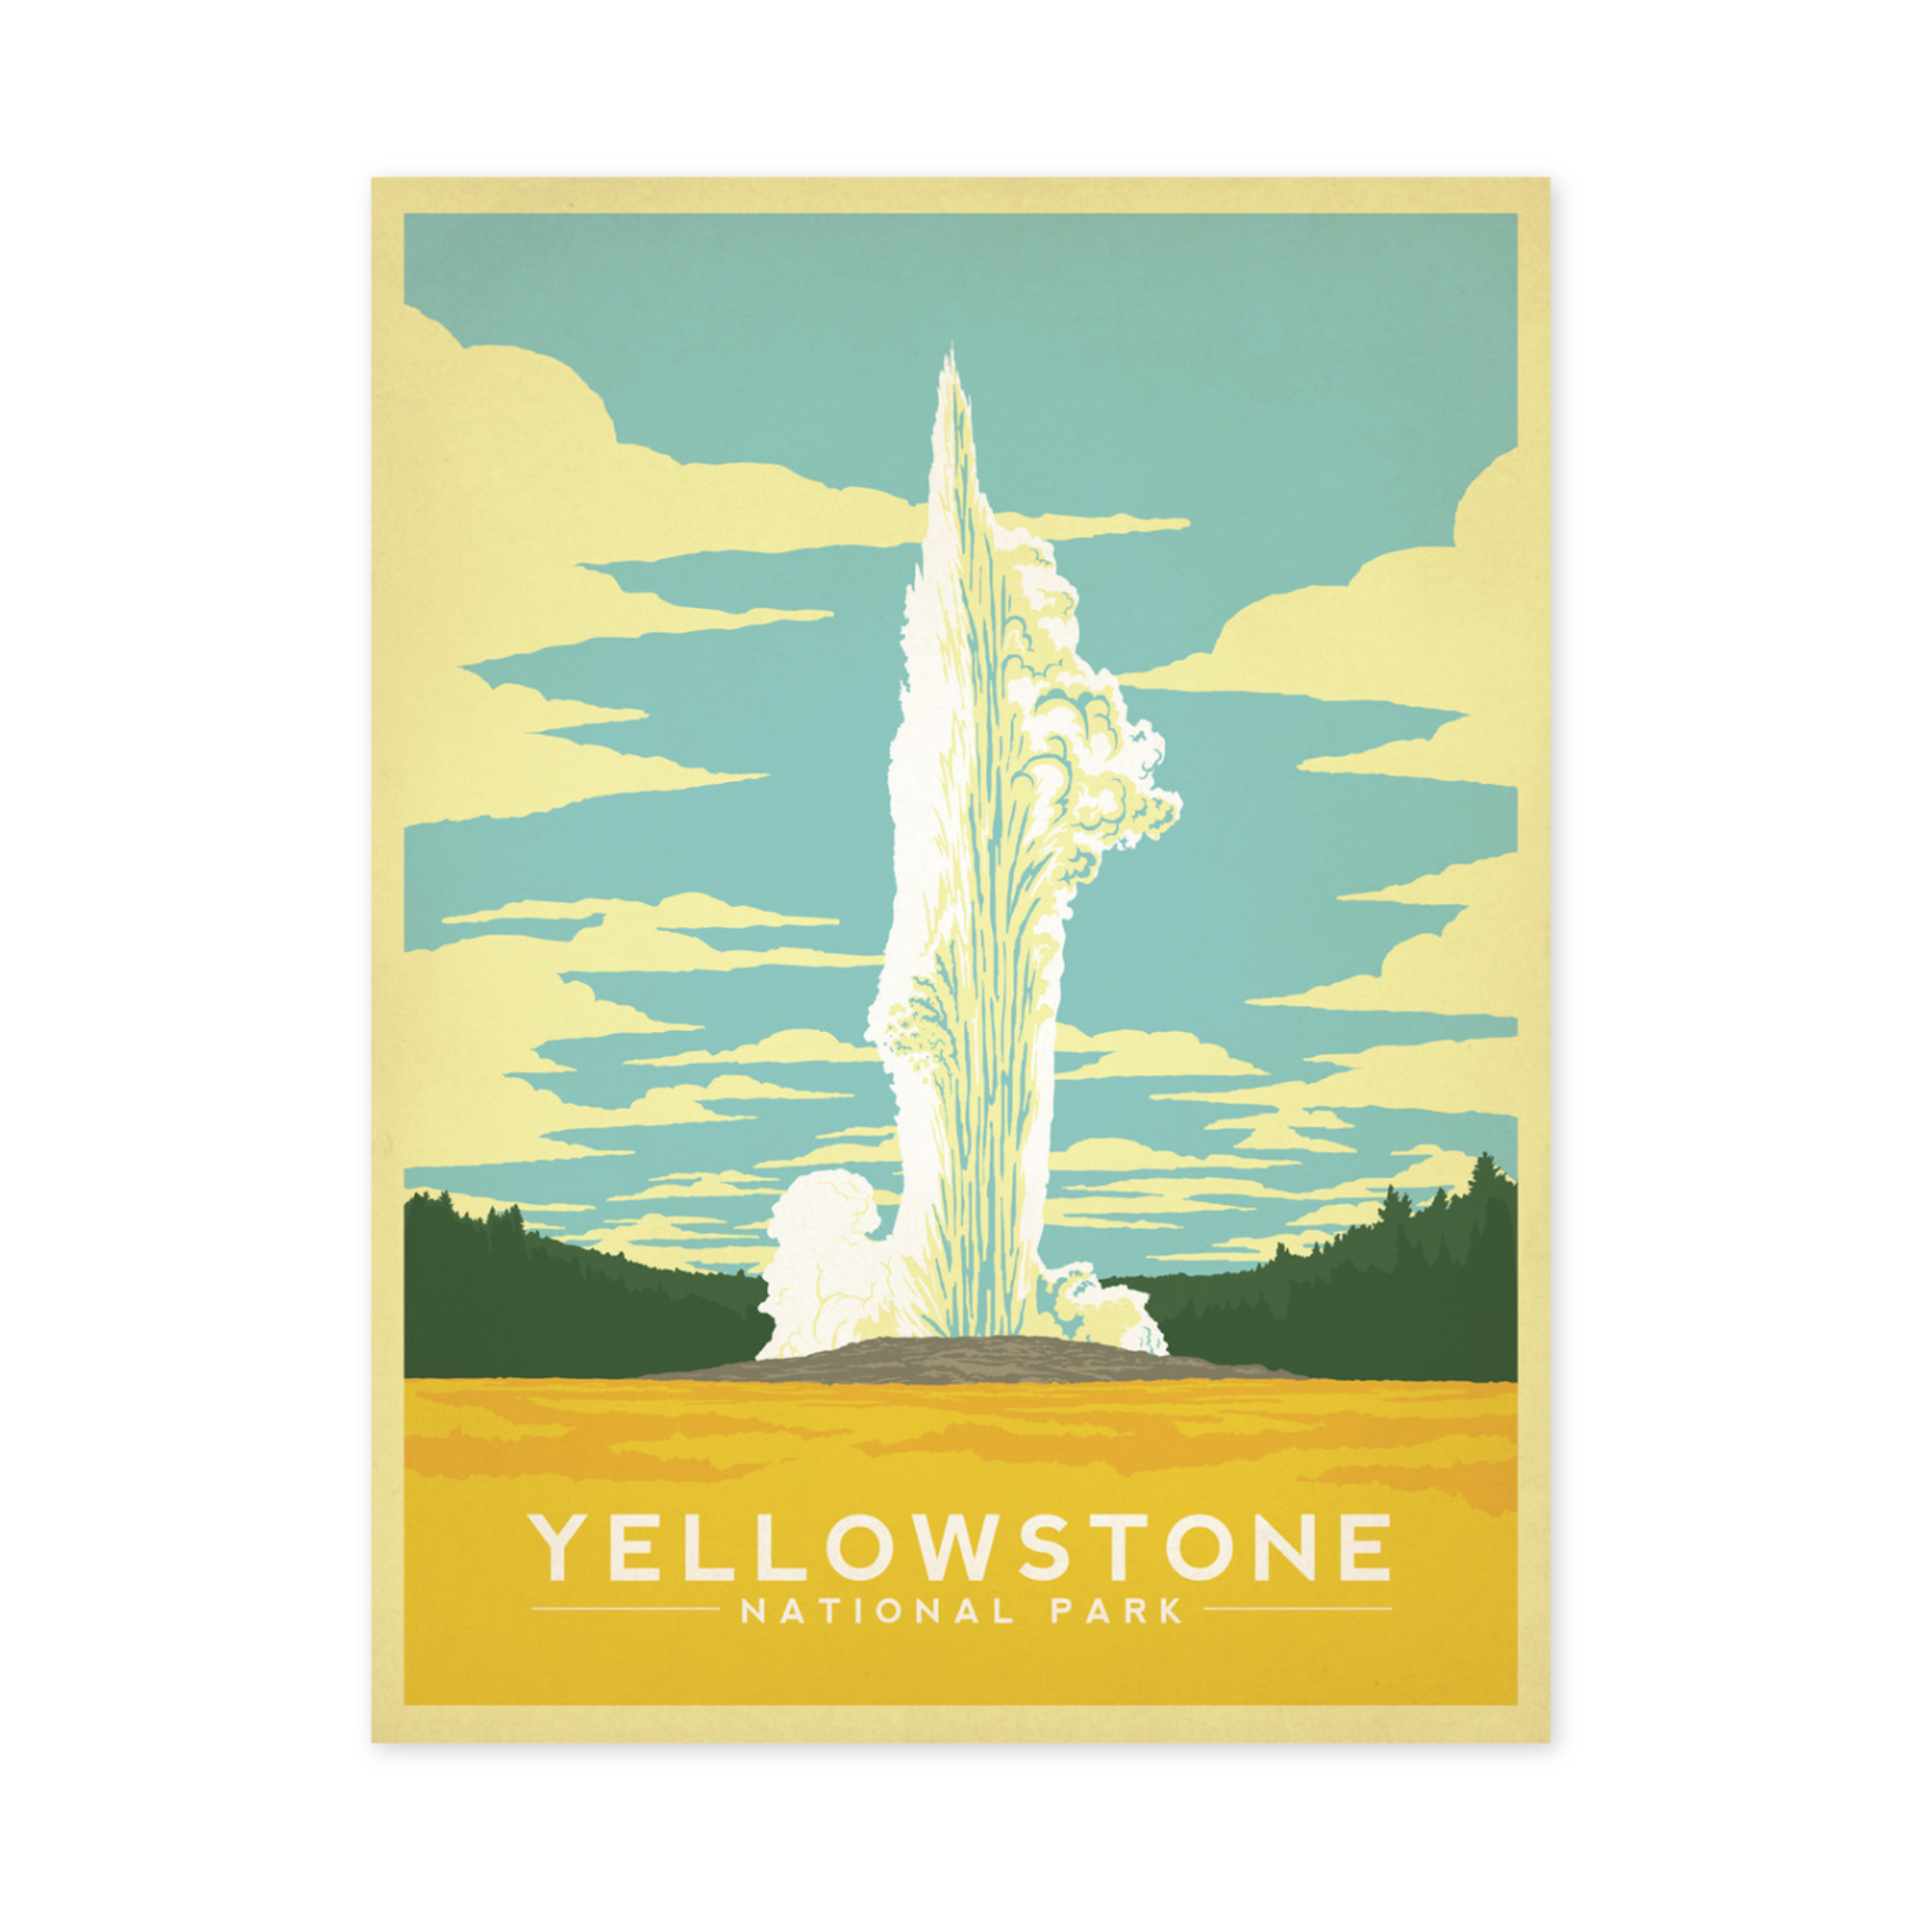 print of old faithful geyser erupting with yellow stone national park printed on the bottom